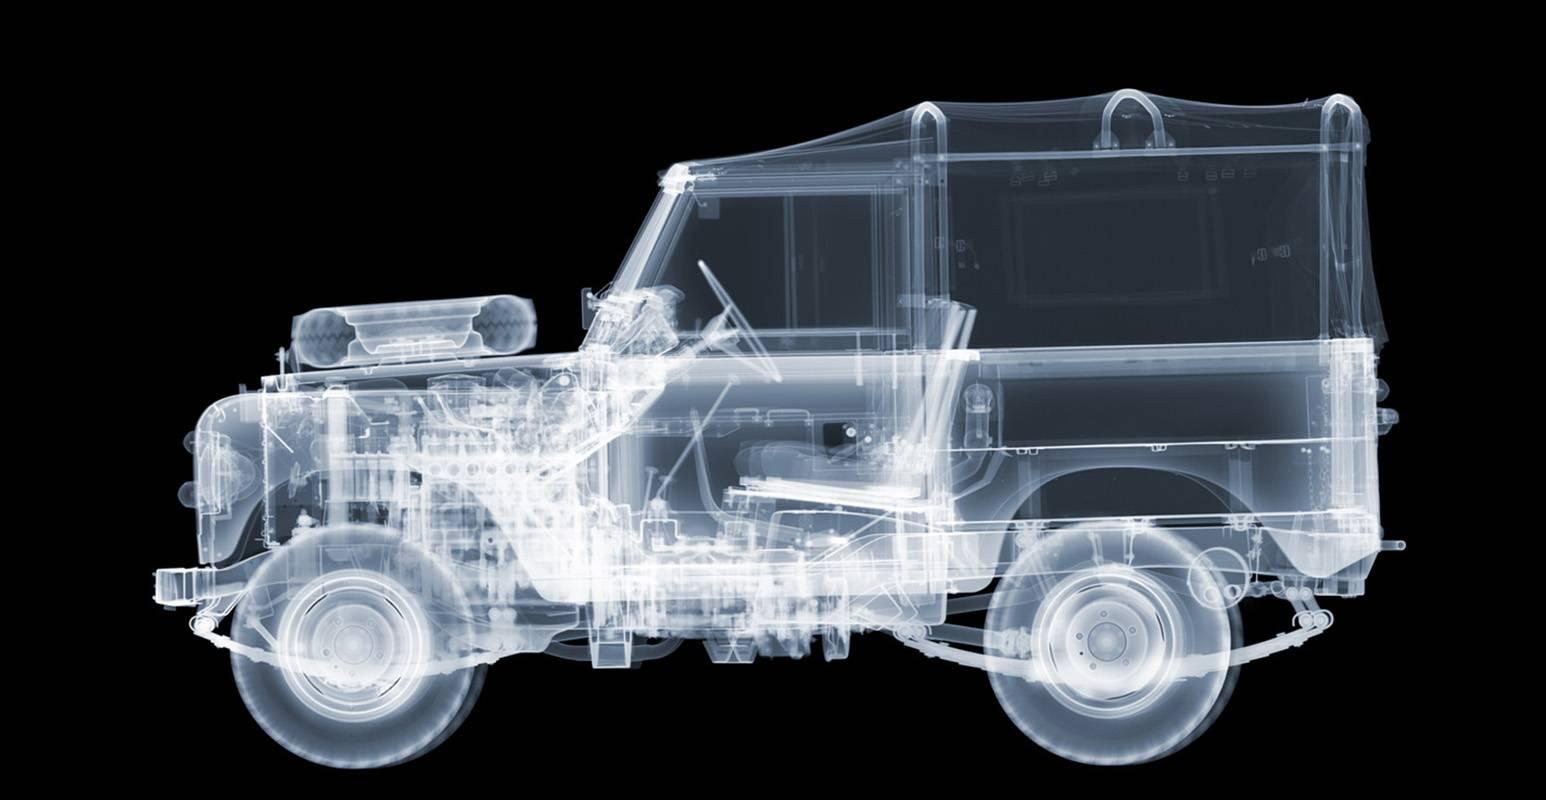 Nick Veasey Abstract Photograph - 1972 Land Rover Series 3